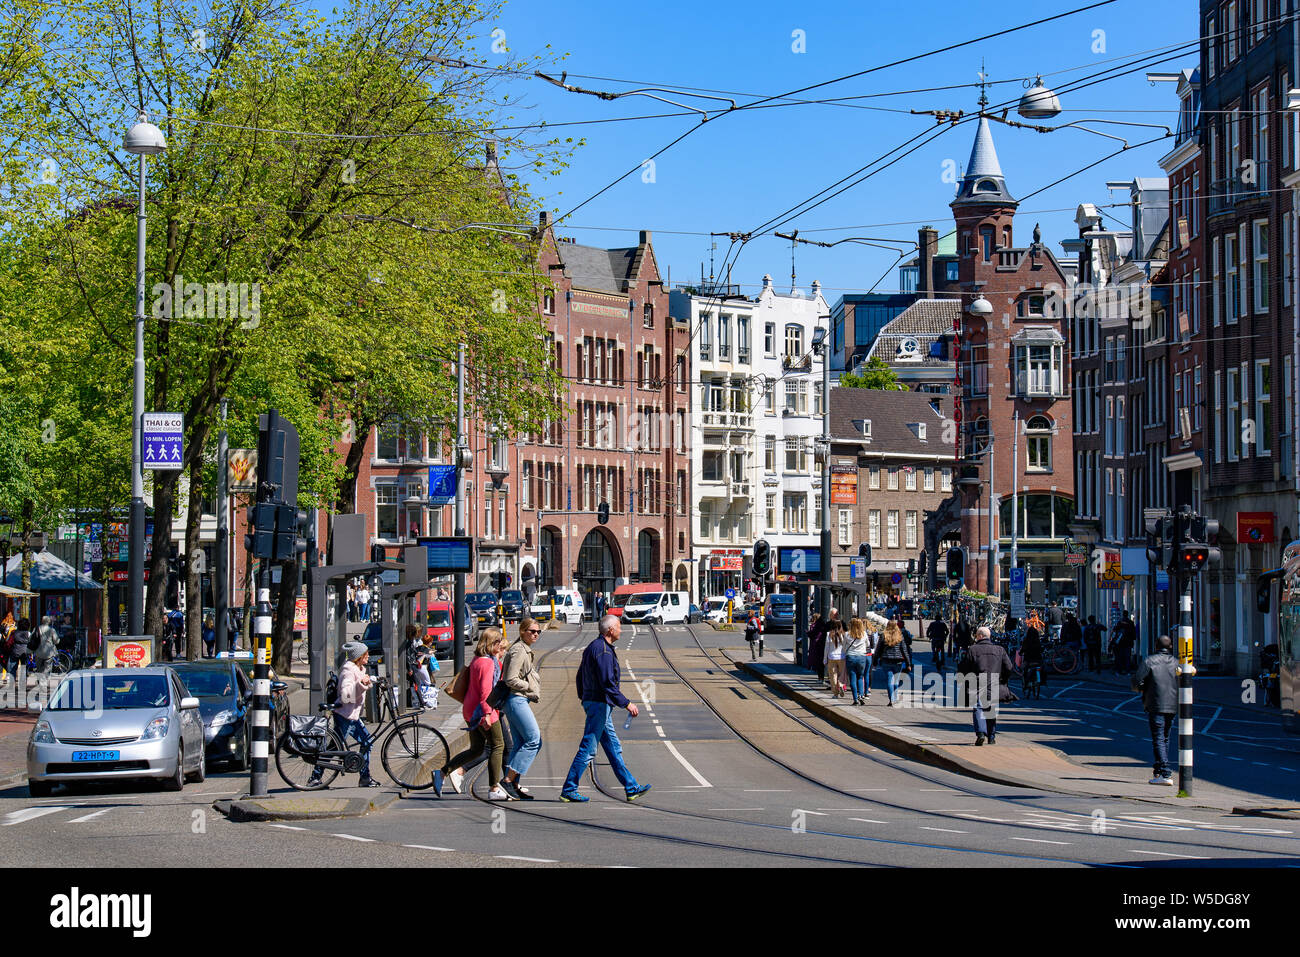 The street view of Amsterdam, Netherlands Stock Photo